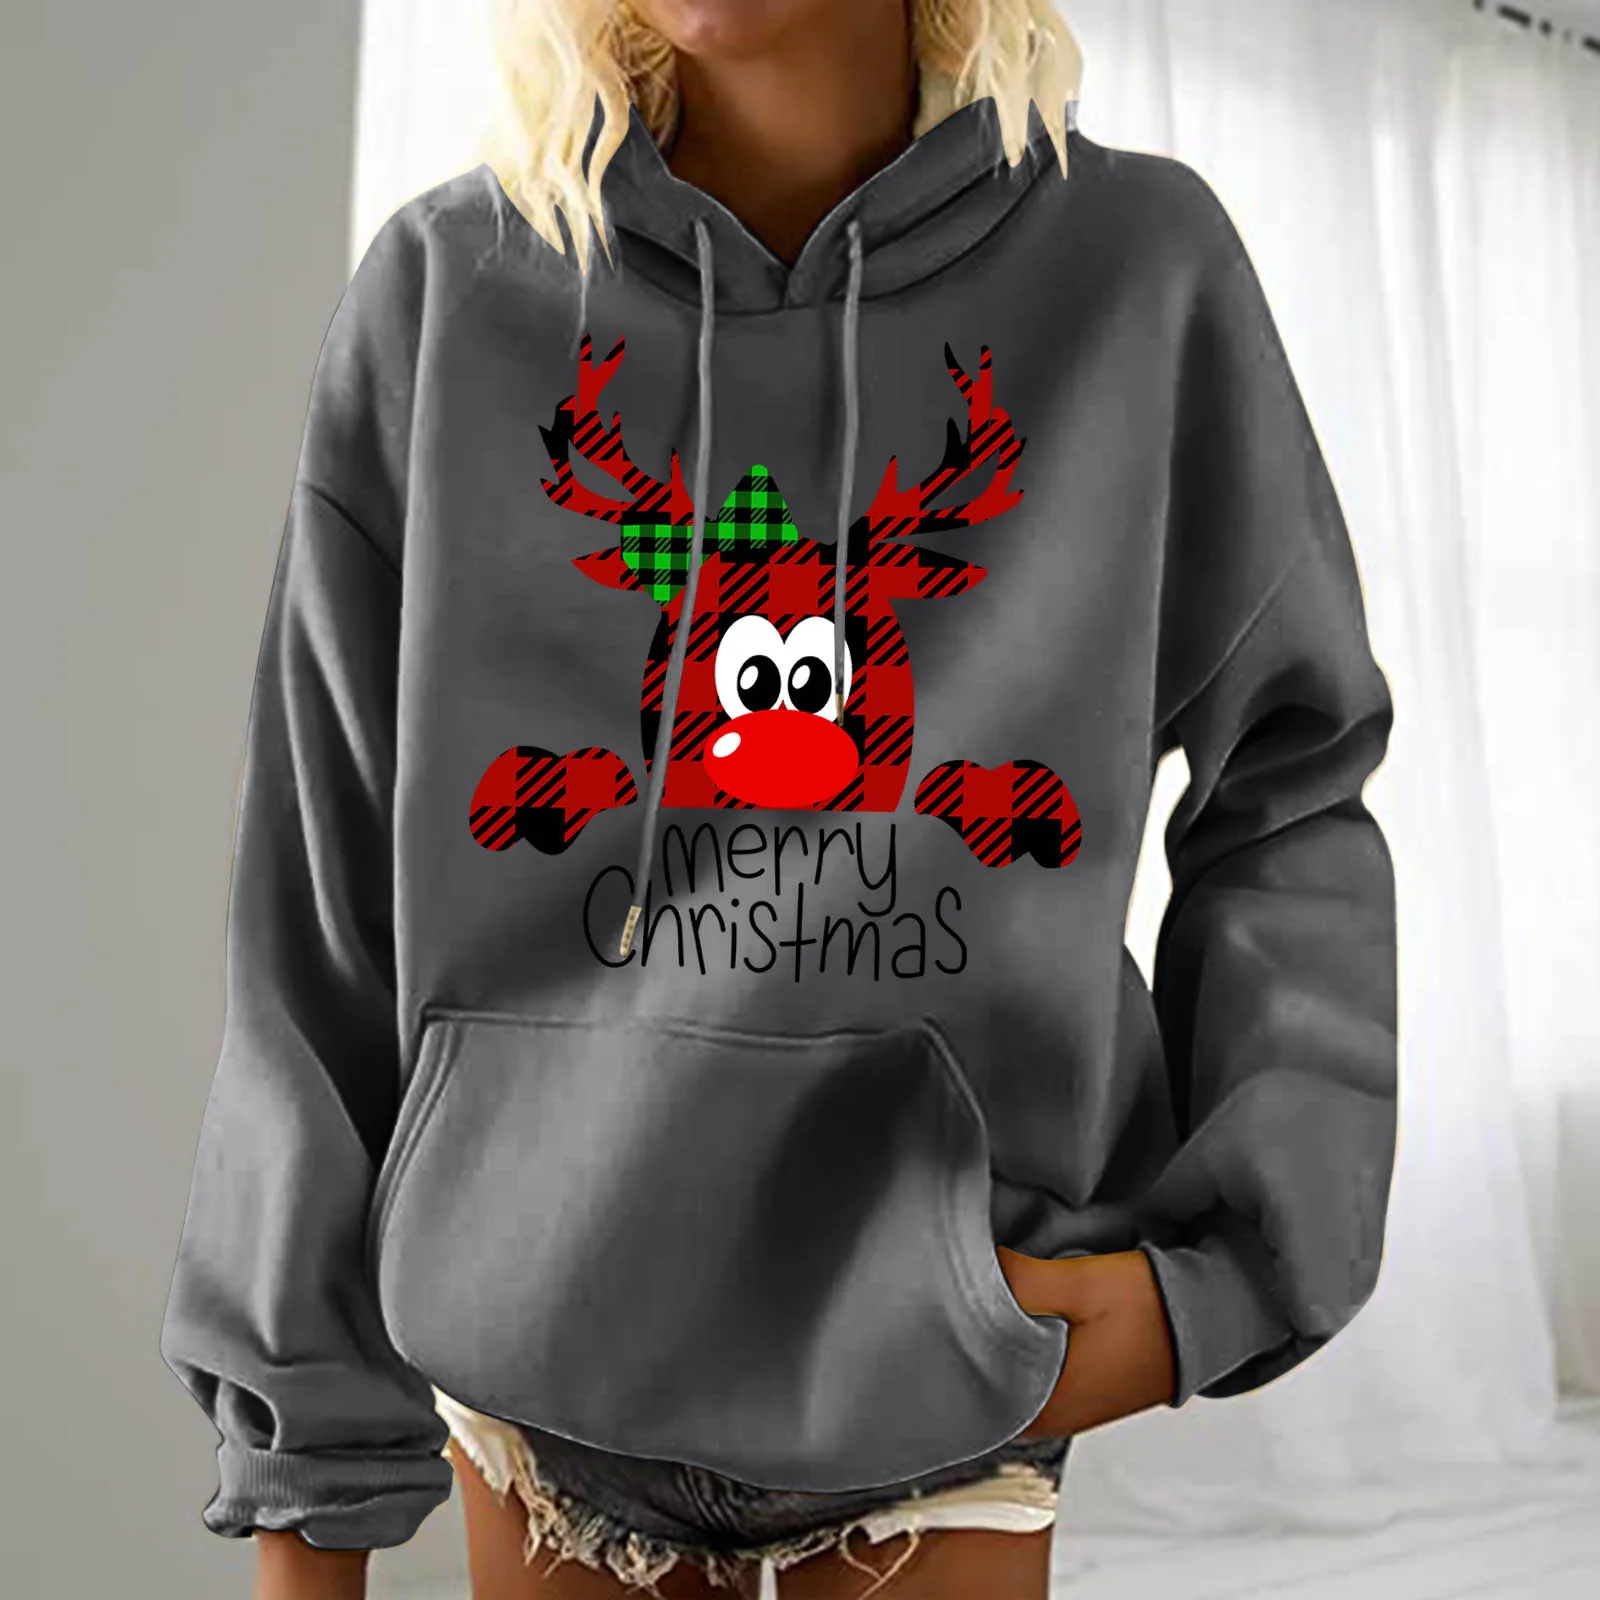 

Top Light Pullover Top Ladies Sweatshirts Christmas Pullover Top What If It All Works Out Sweatshirt Fall Apparel Women